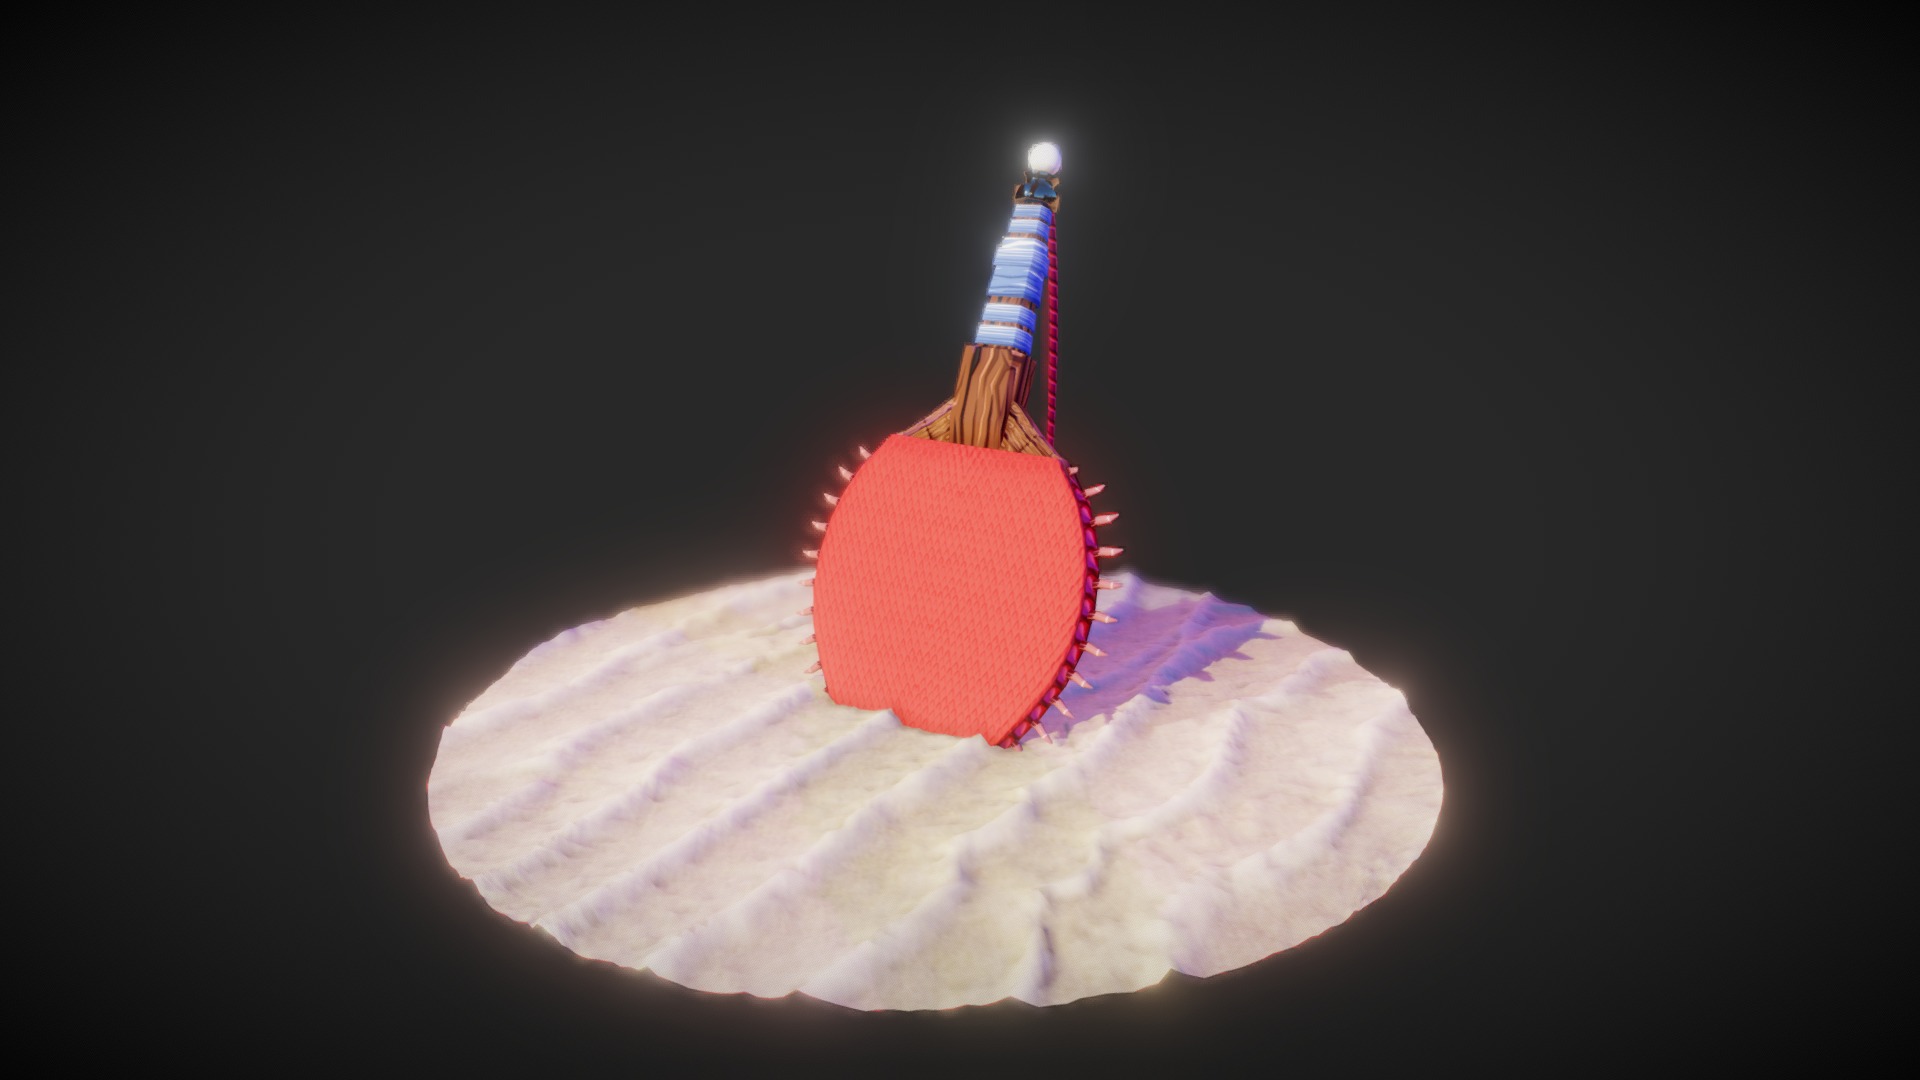 3D model Ping Pong Racket - This is a 3D model of the Ping Pong Racket. The 3D model is about a cone shaped object with a light on top.